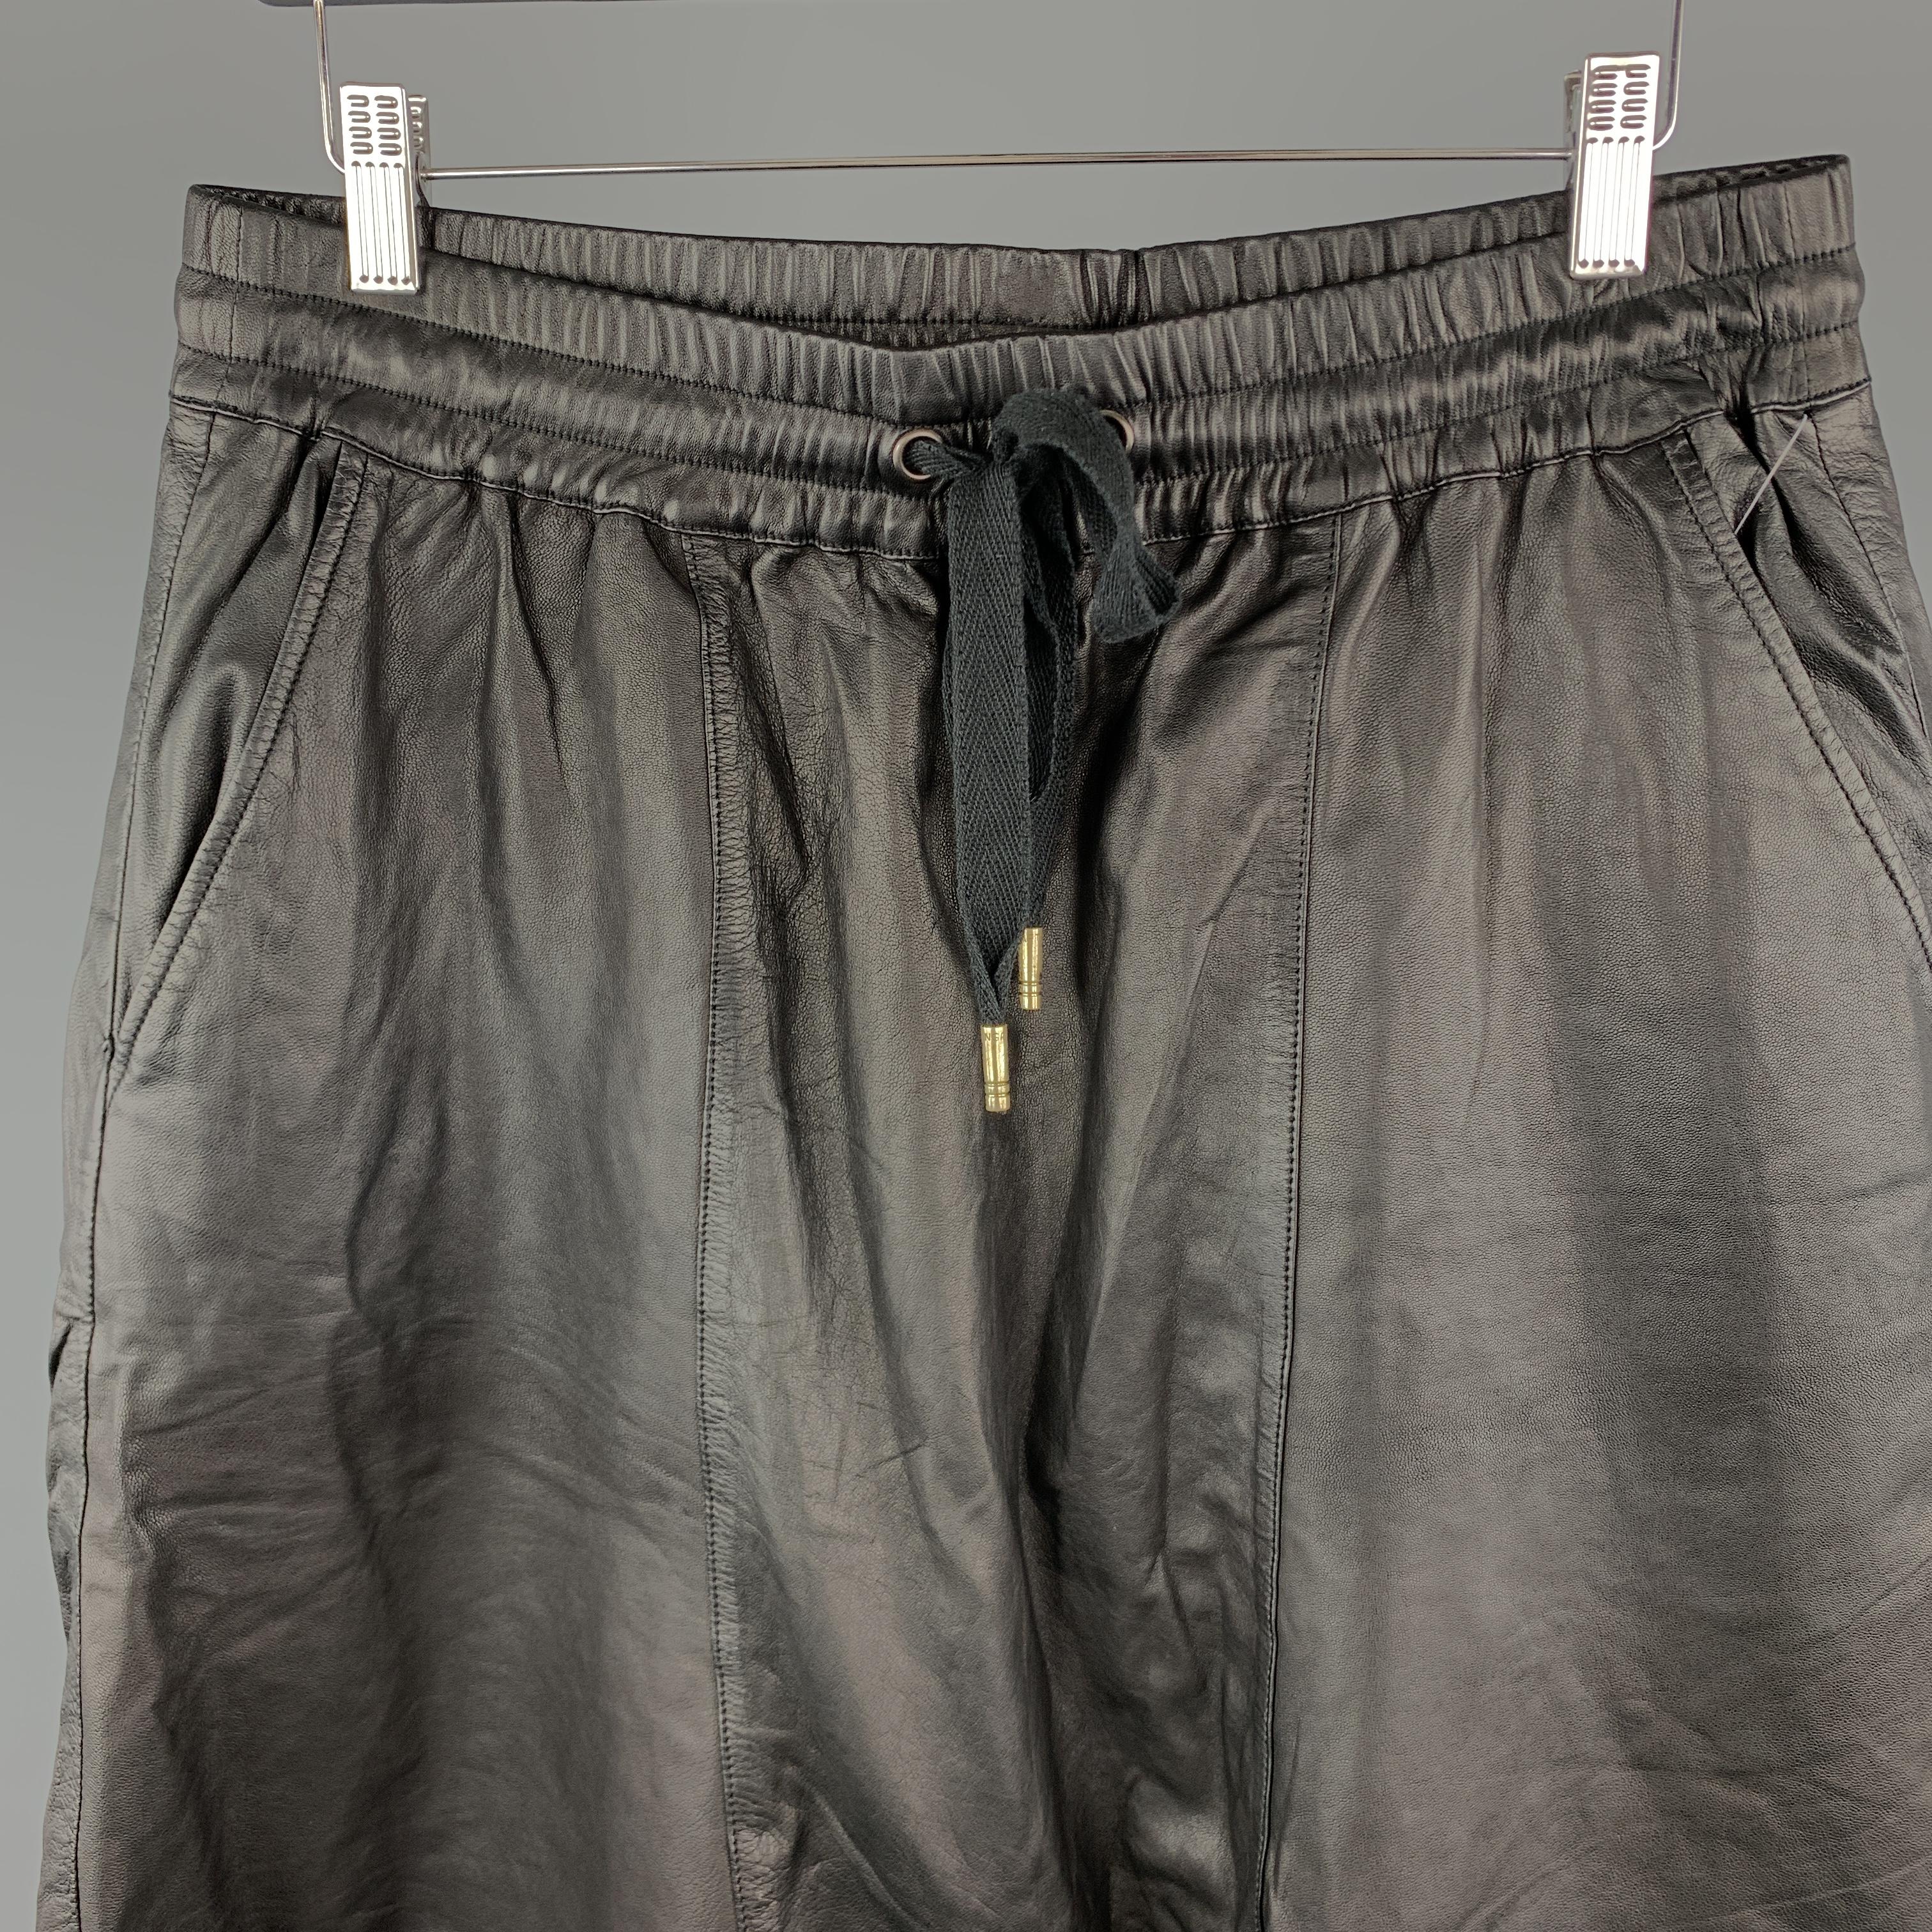 SKINGRAFT Shorts comes in a black tone in a solid leather material, with a drawstring, a drop-crotch, seam and slit pockets. 

Excellent Pre-Owned Condition.
Marked:

Measurements:

Waist: 33 in. 
Rise: 20 in. 
Inseam: 2.5 in. 